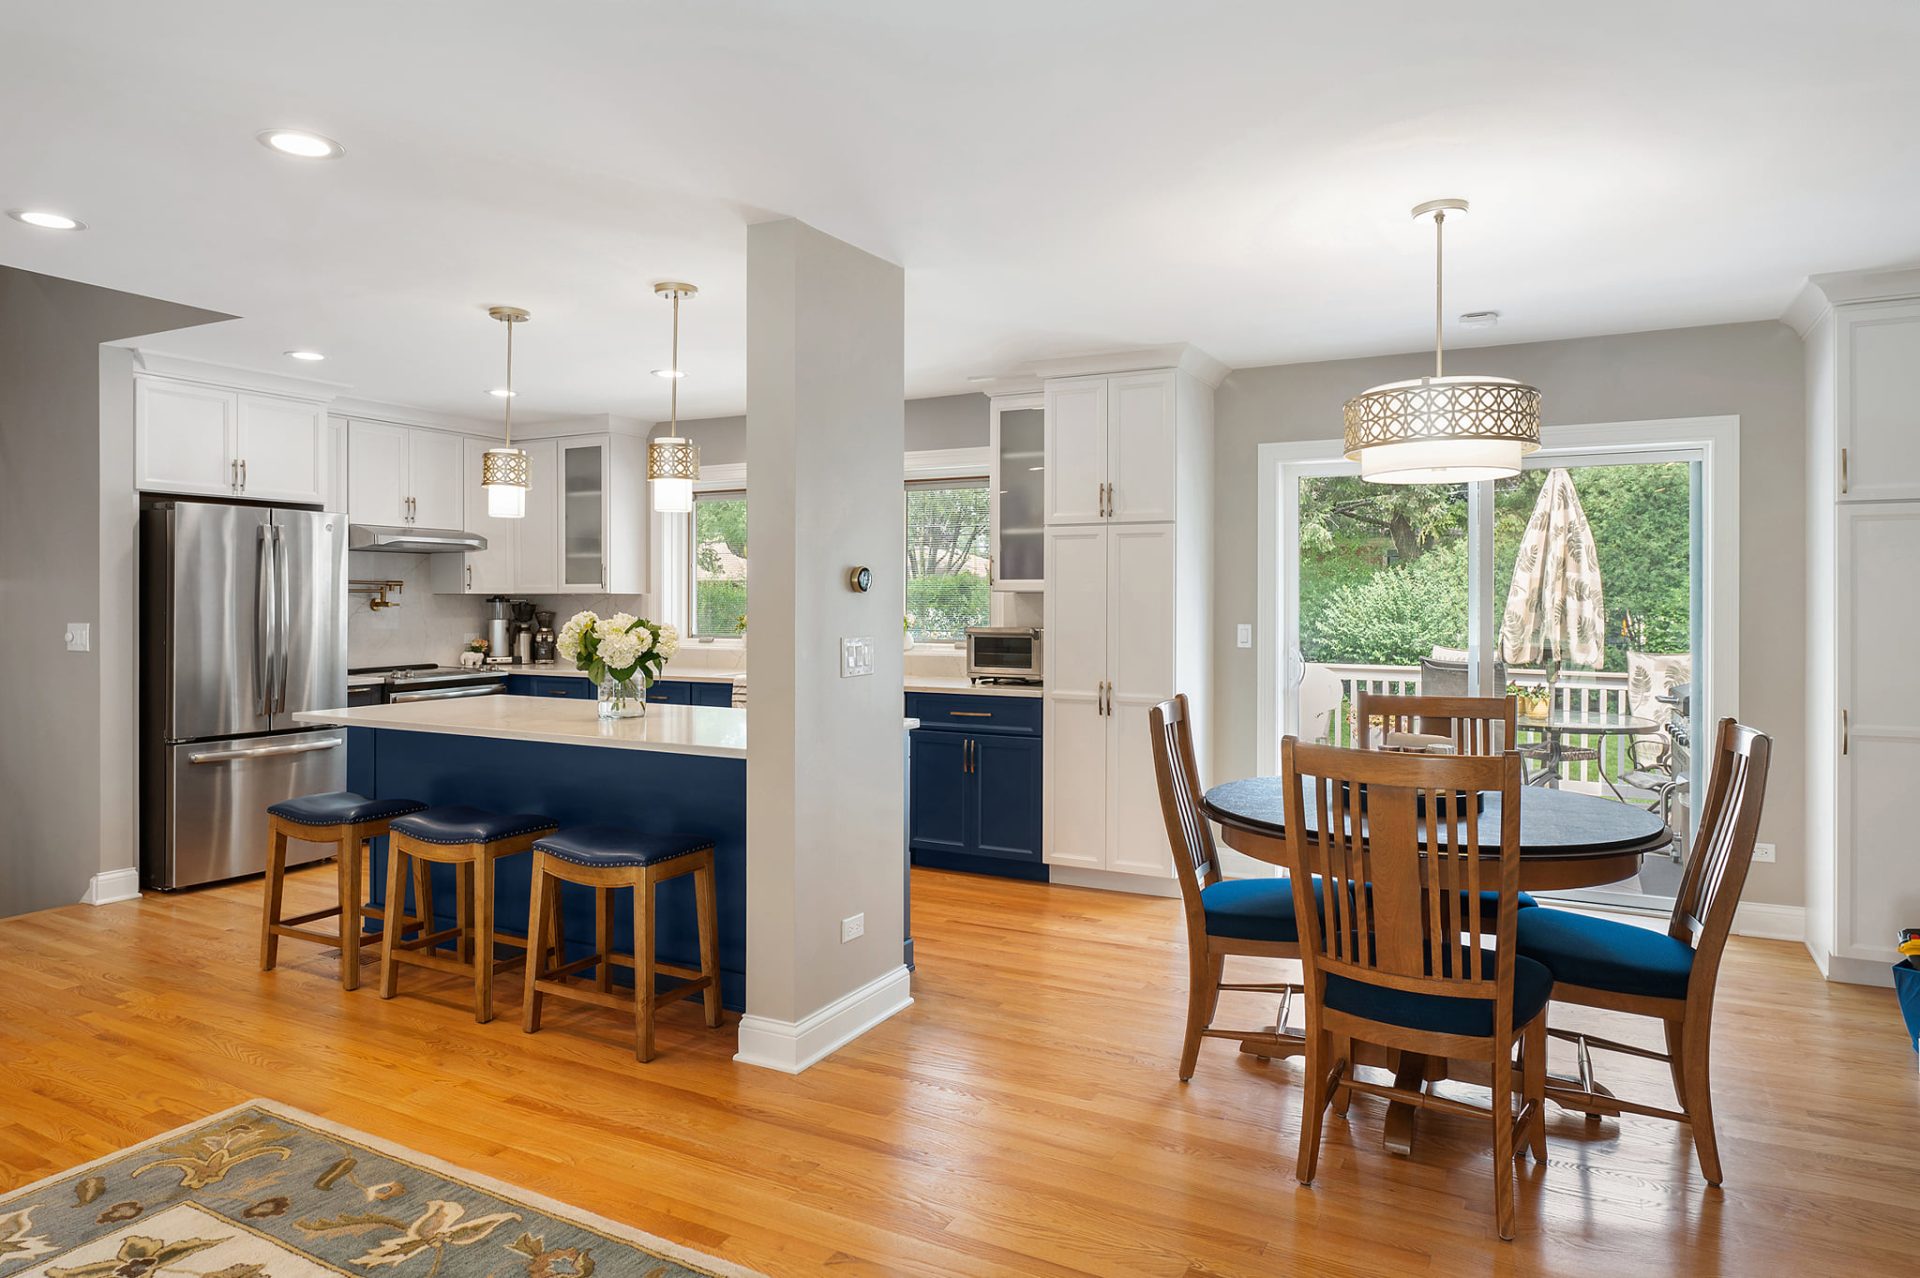 Remodeled kitchen with dining area, white quartz countertop, and navy cabinets